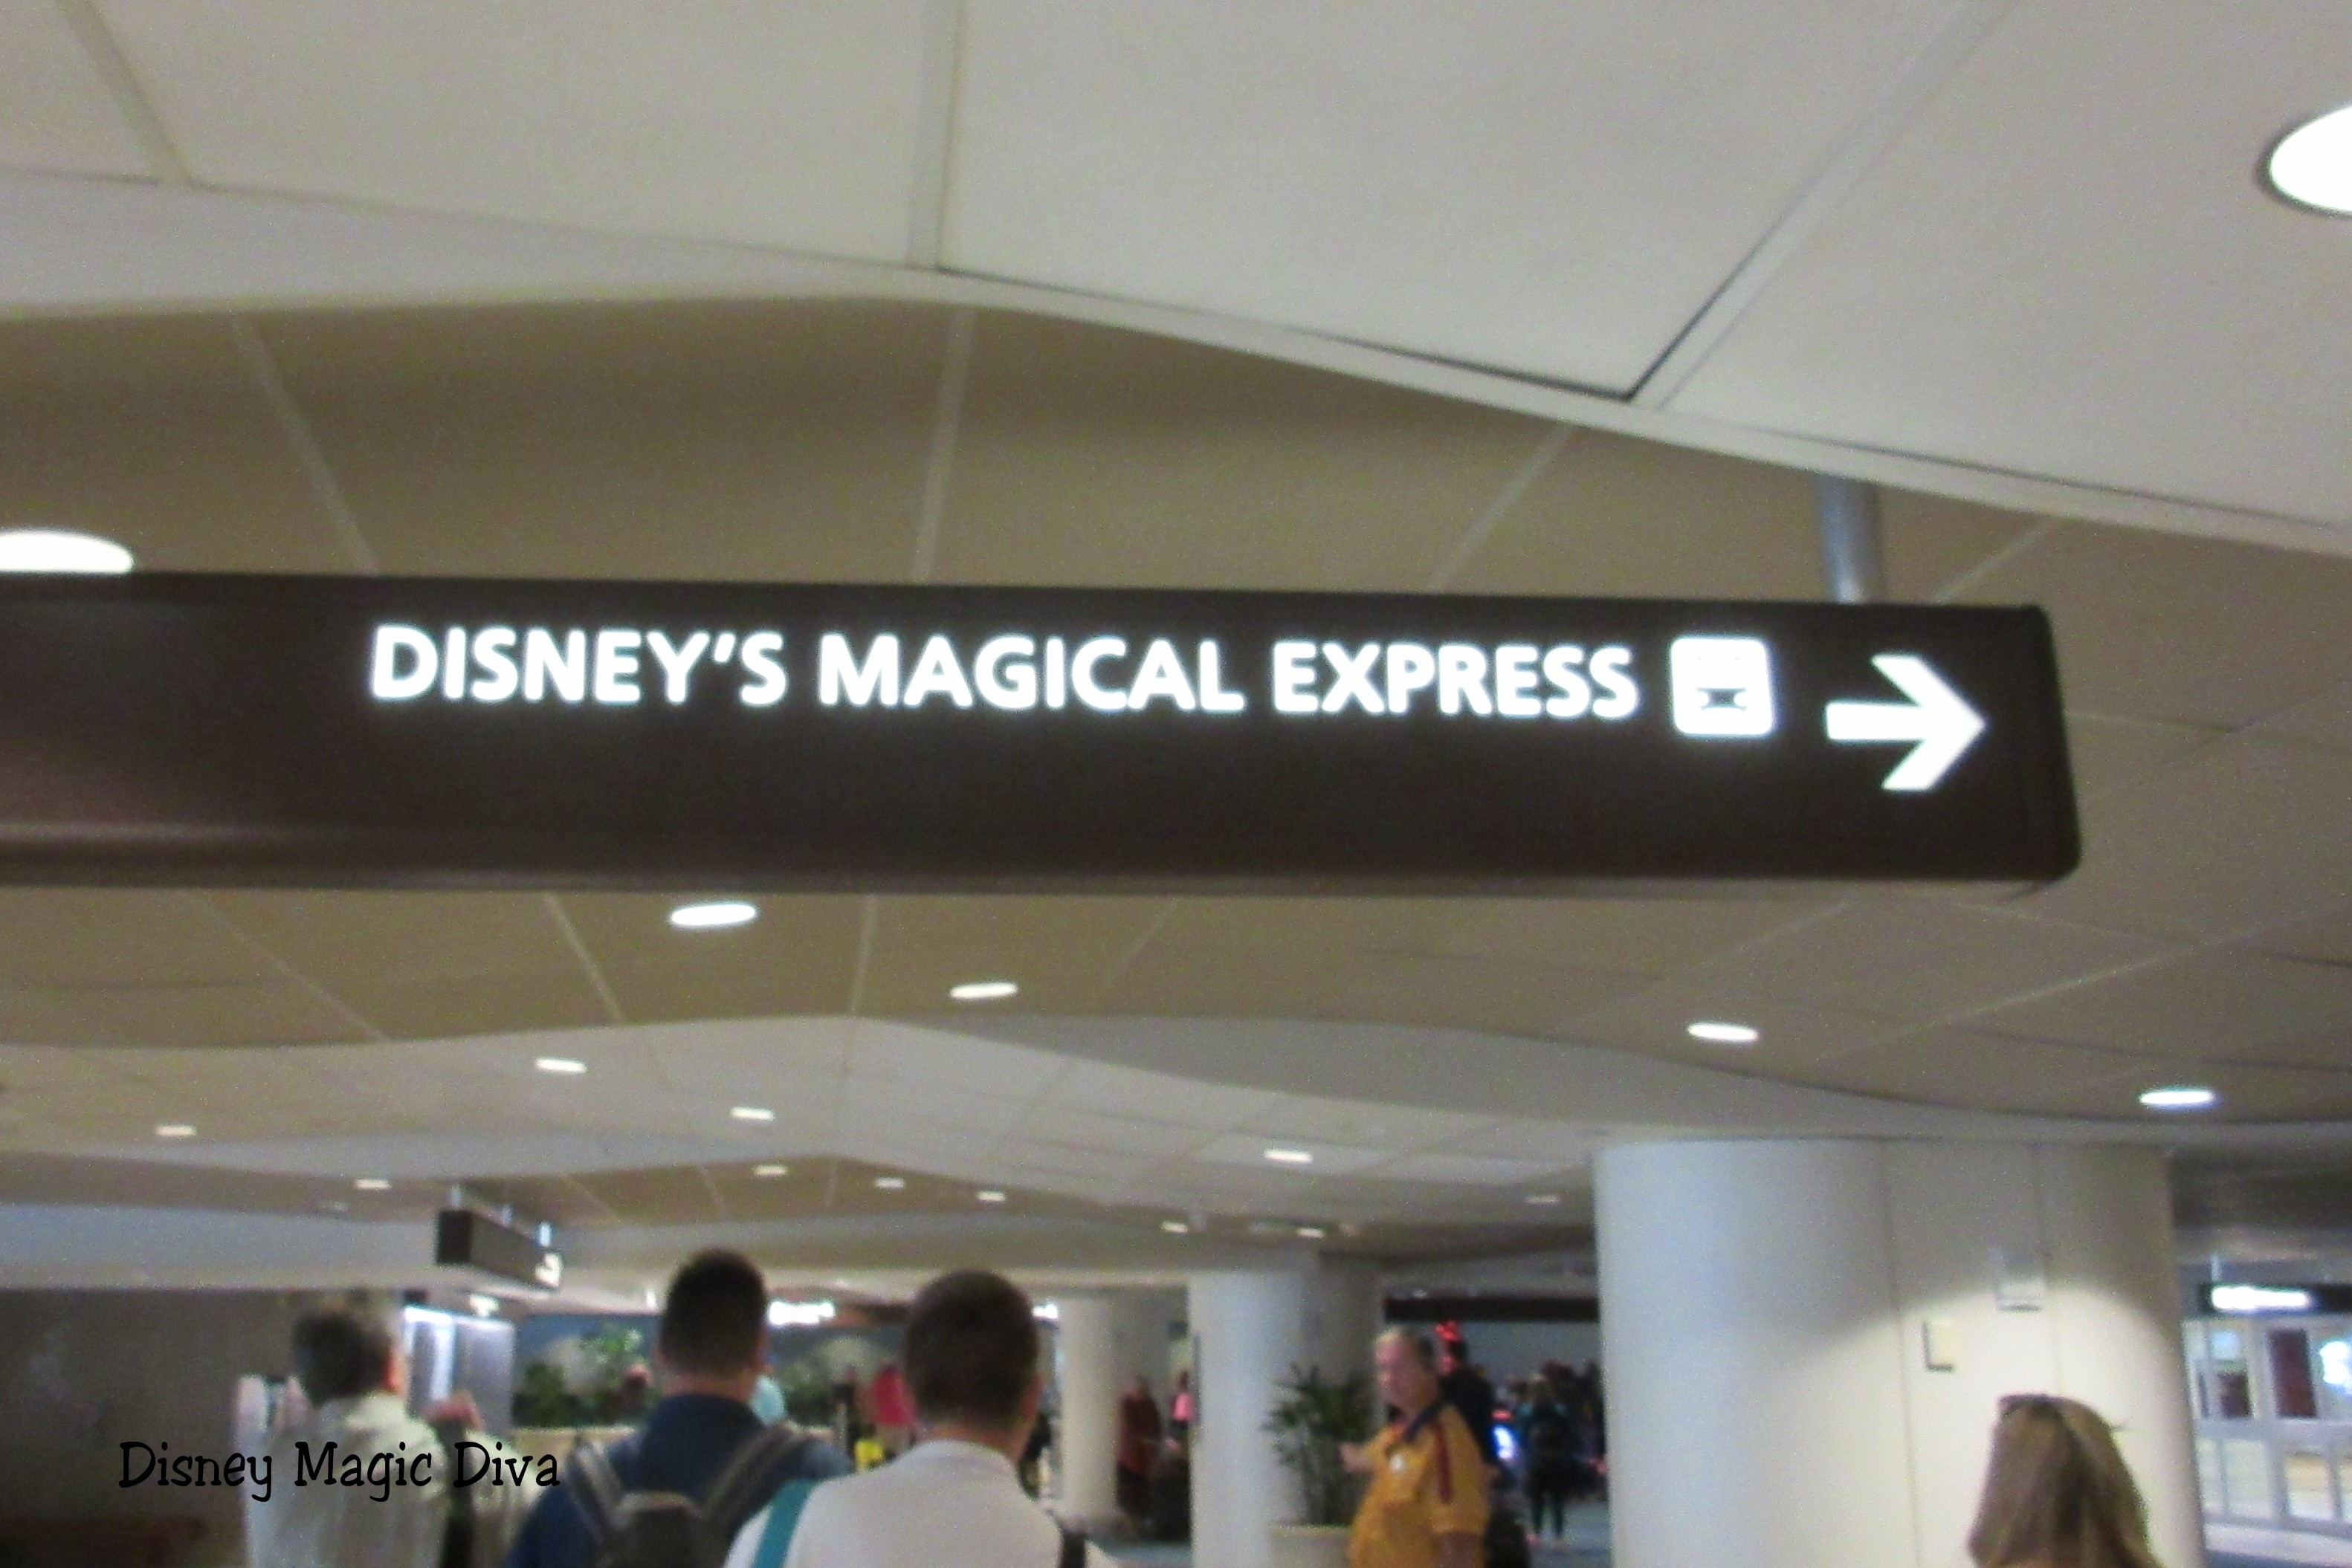 Disney’s Magical Express: Your Complimentary Carriage Ride to the World